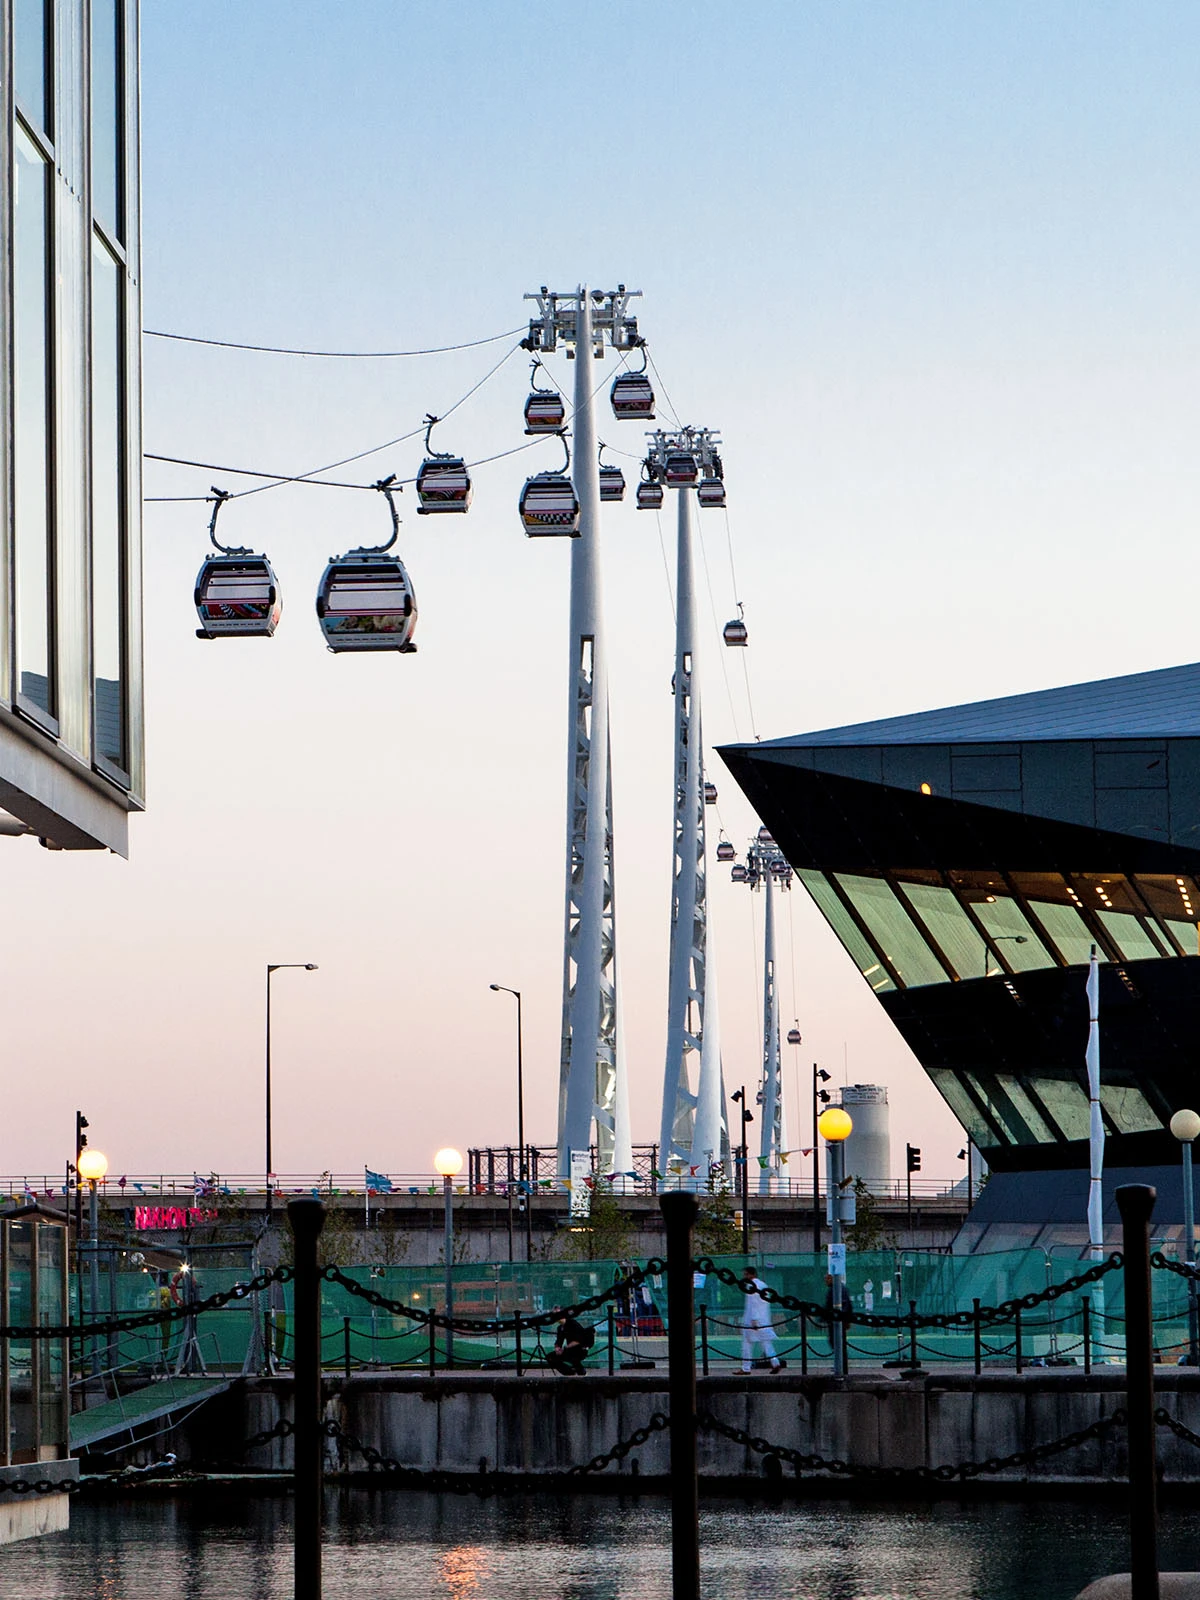 Emirates Air Lines Cable Cars in docklands context